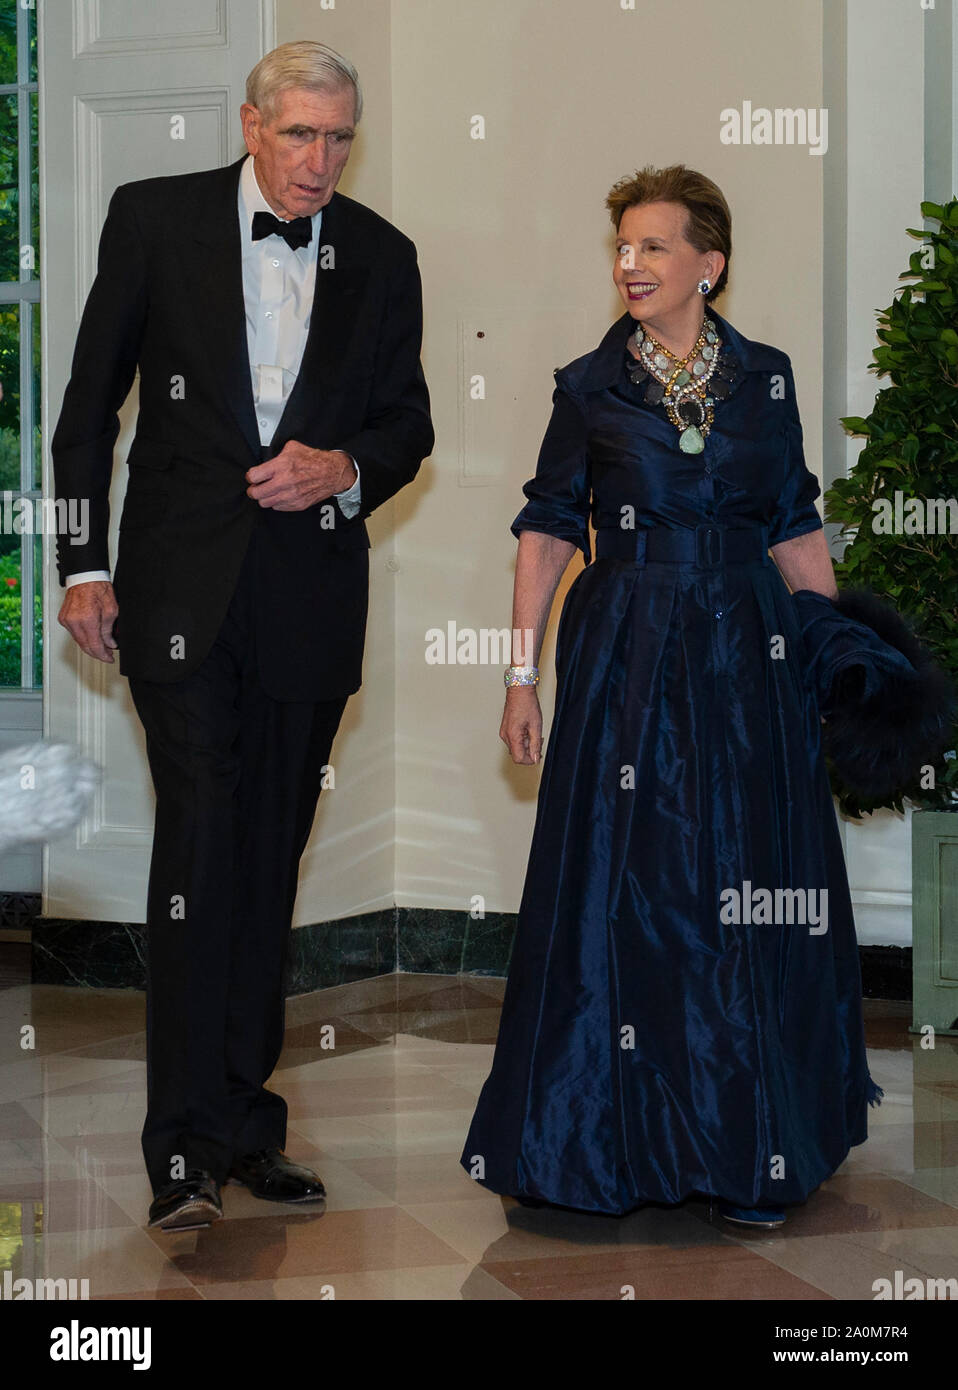 Adrienne Arsht and C. Boyden Gray arrive for the State Dinner hosted by United States President Donald J. Trump and First lady Melania Trump in honor of Prime Minister Scott Morrison of Australia and his wife, Jenny Morrison, at the White House in Washington, DC on Friday, September 20, 2019.Credit: Ron Sachs/Pool via CNP/MediaPunch Stock Photo